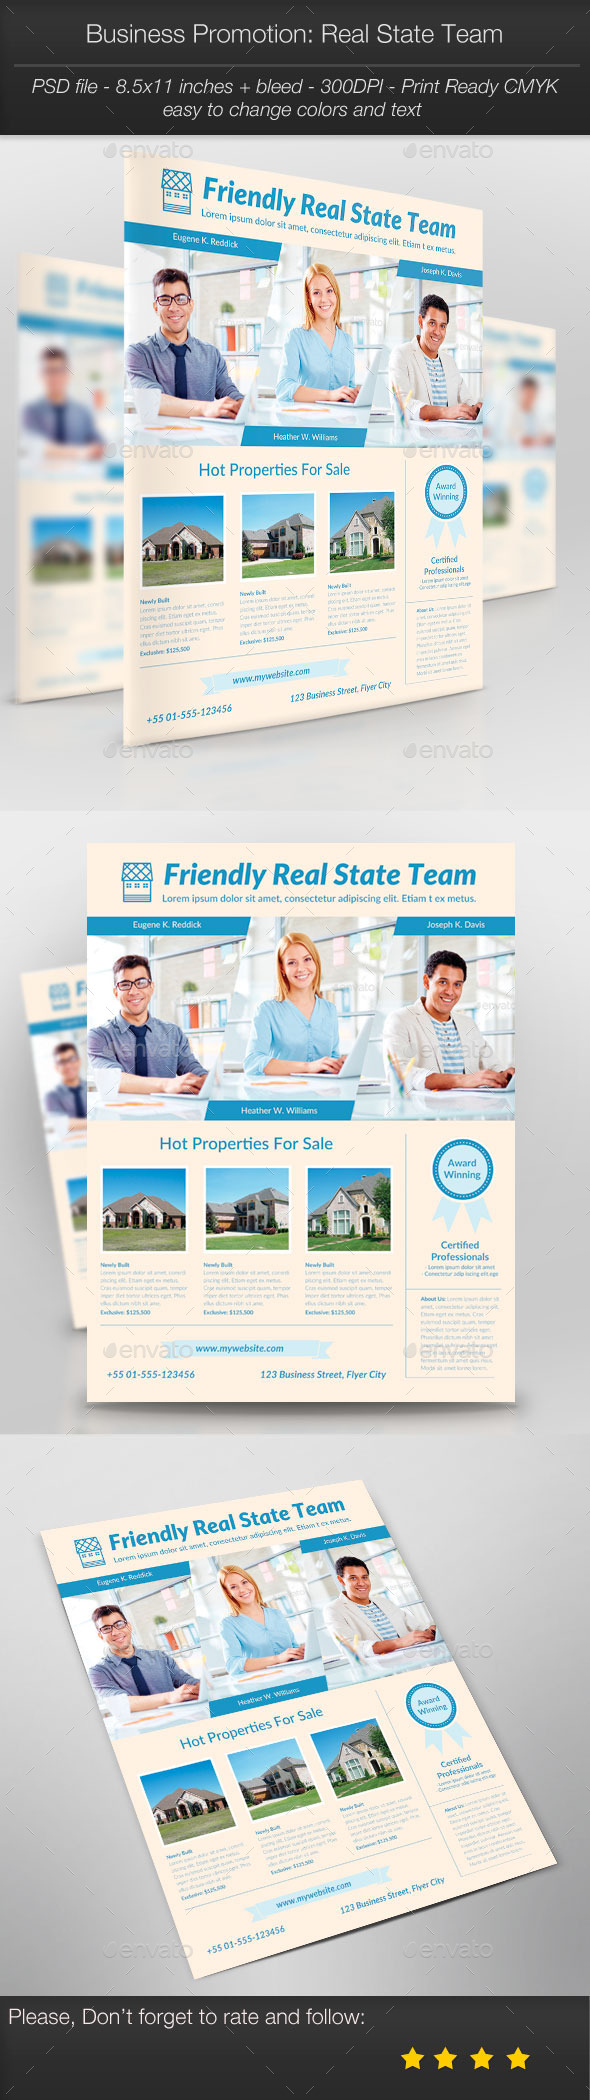 Business Promotion: Real State Team